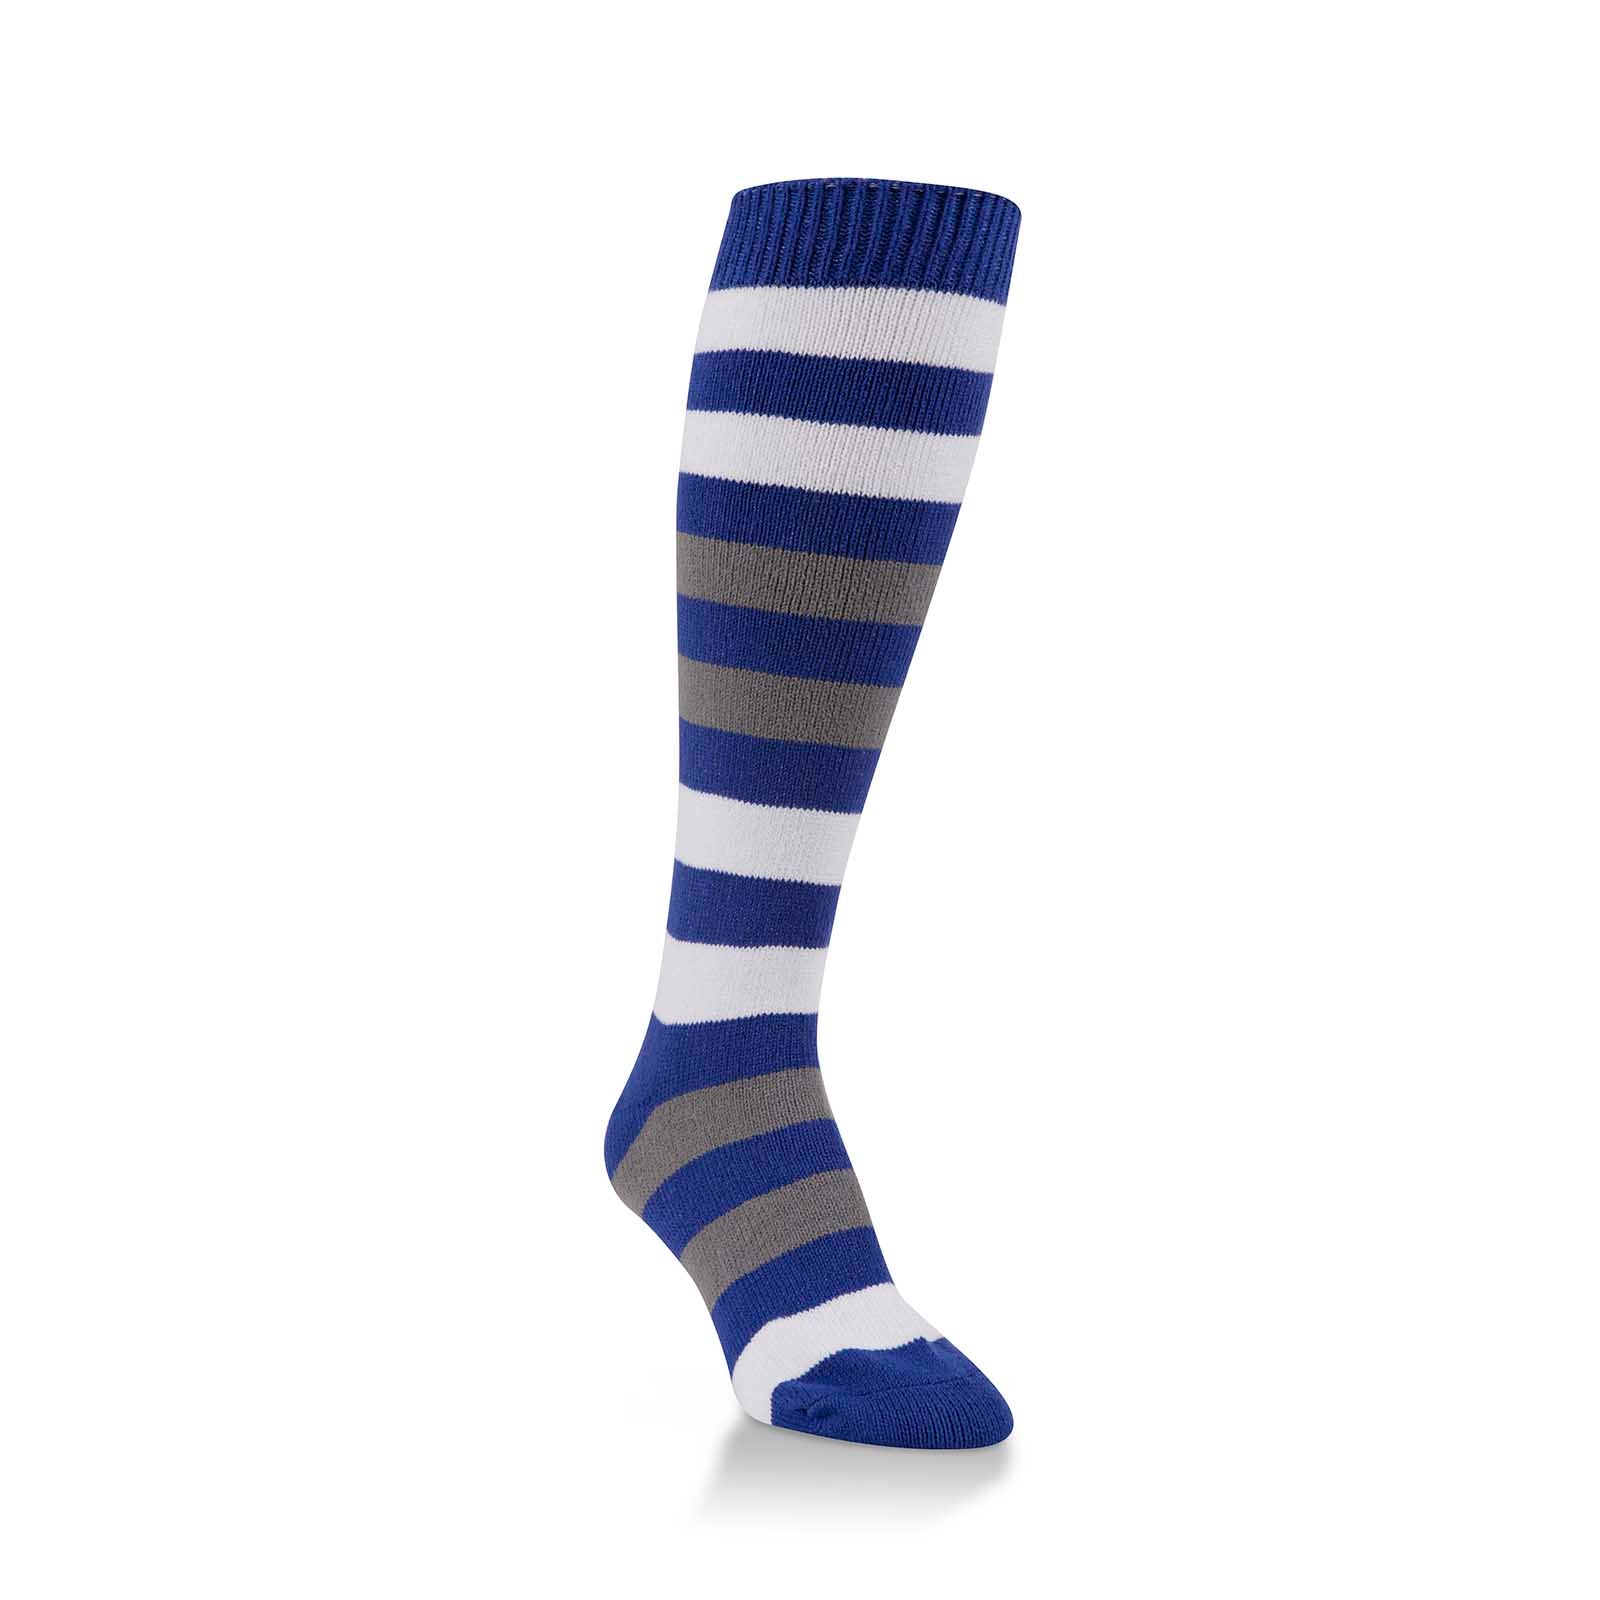 Team Tri-Color Rugby Knee-high Navy/White/Grey